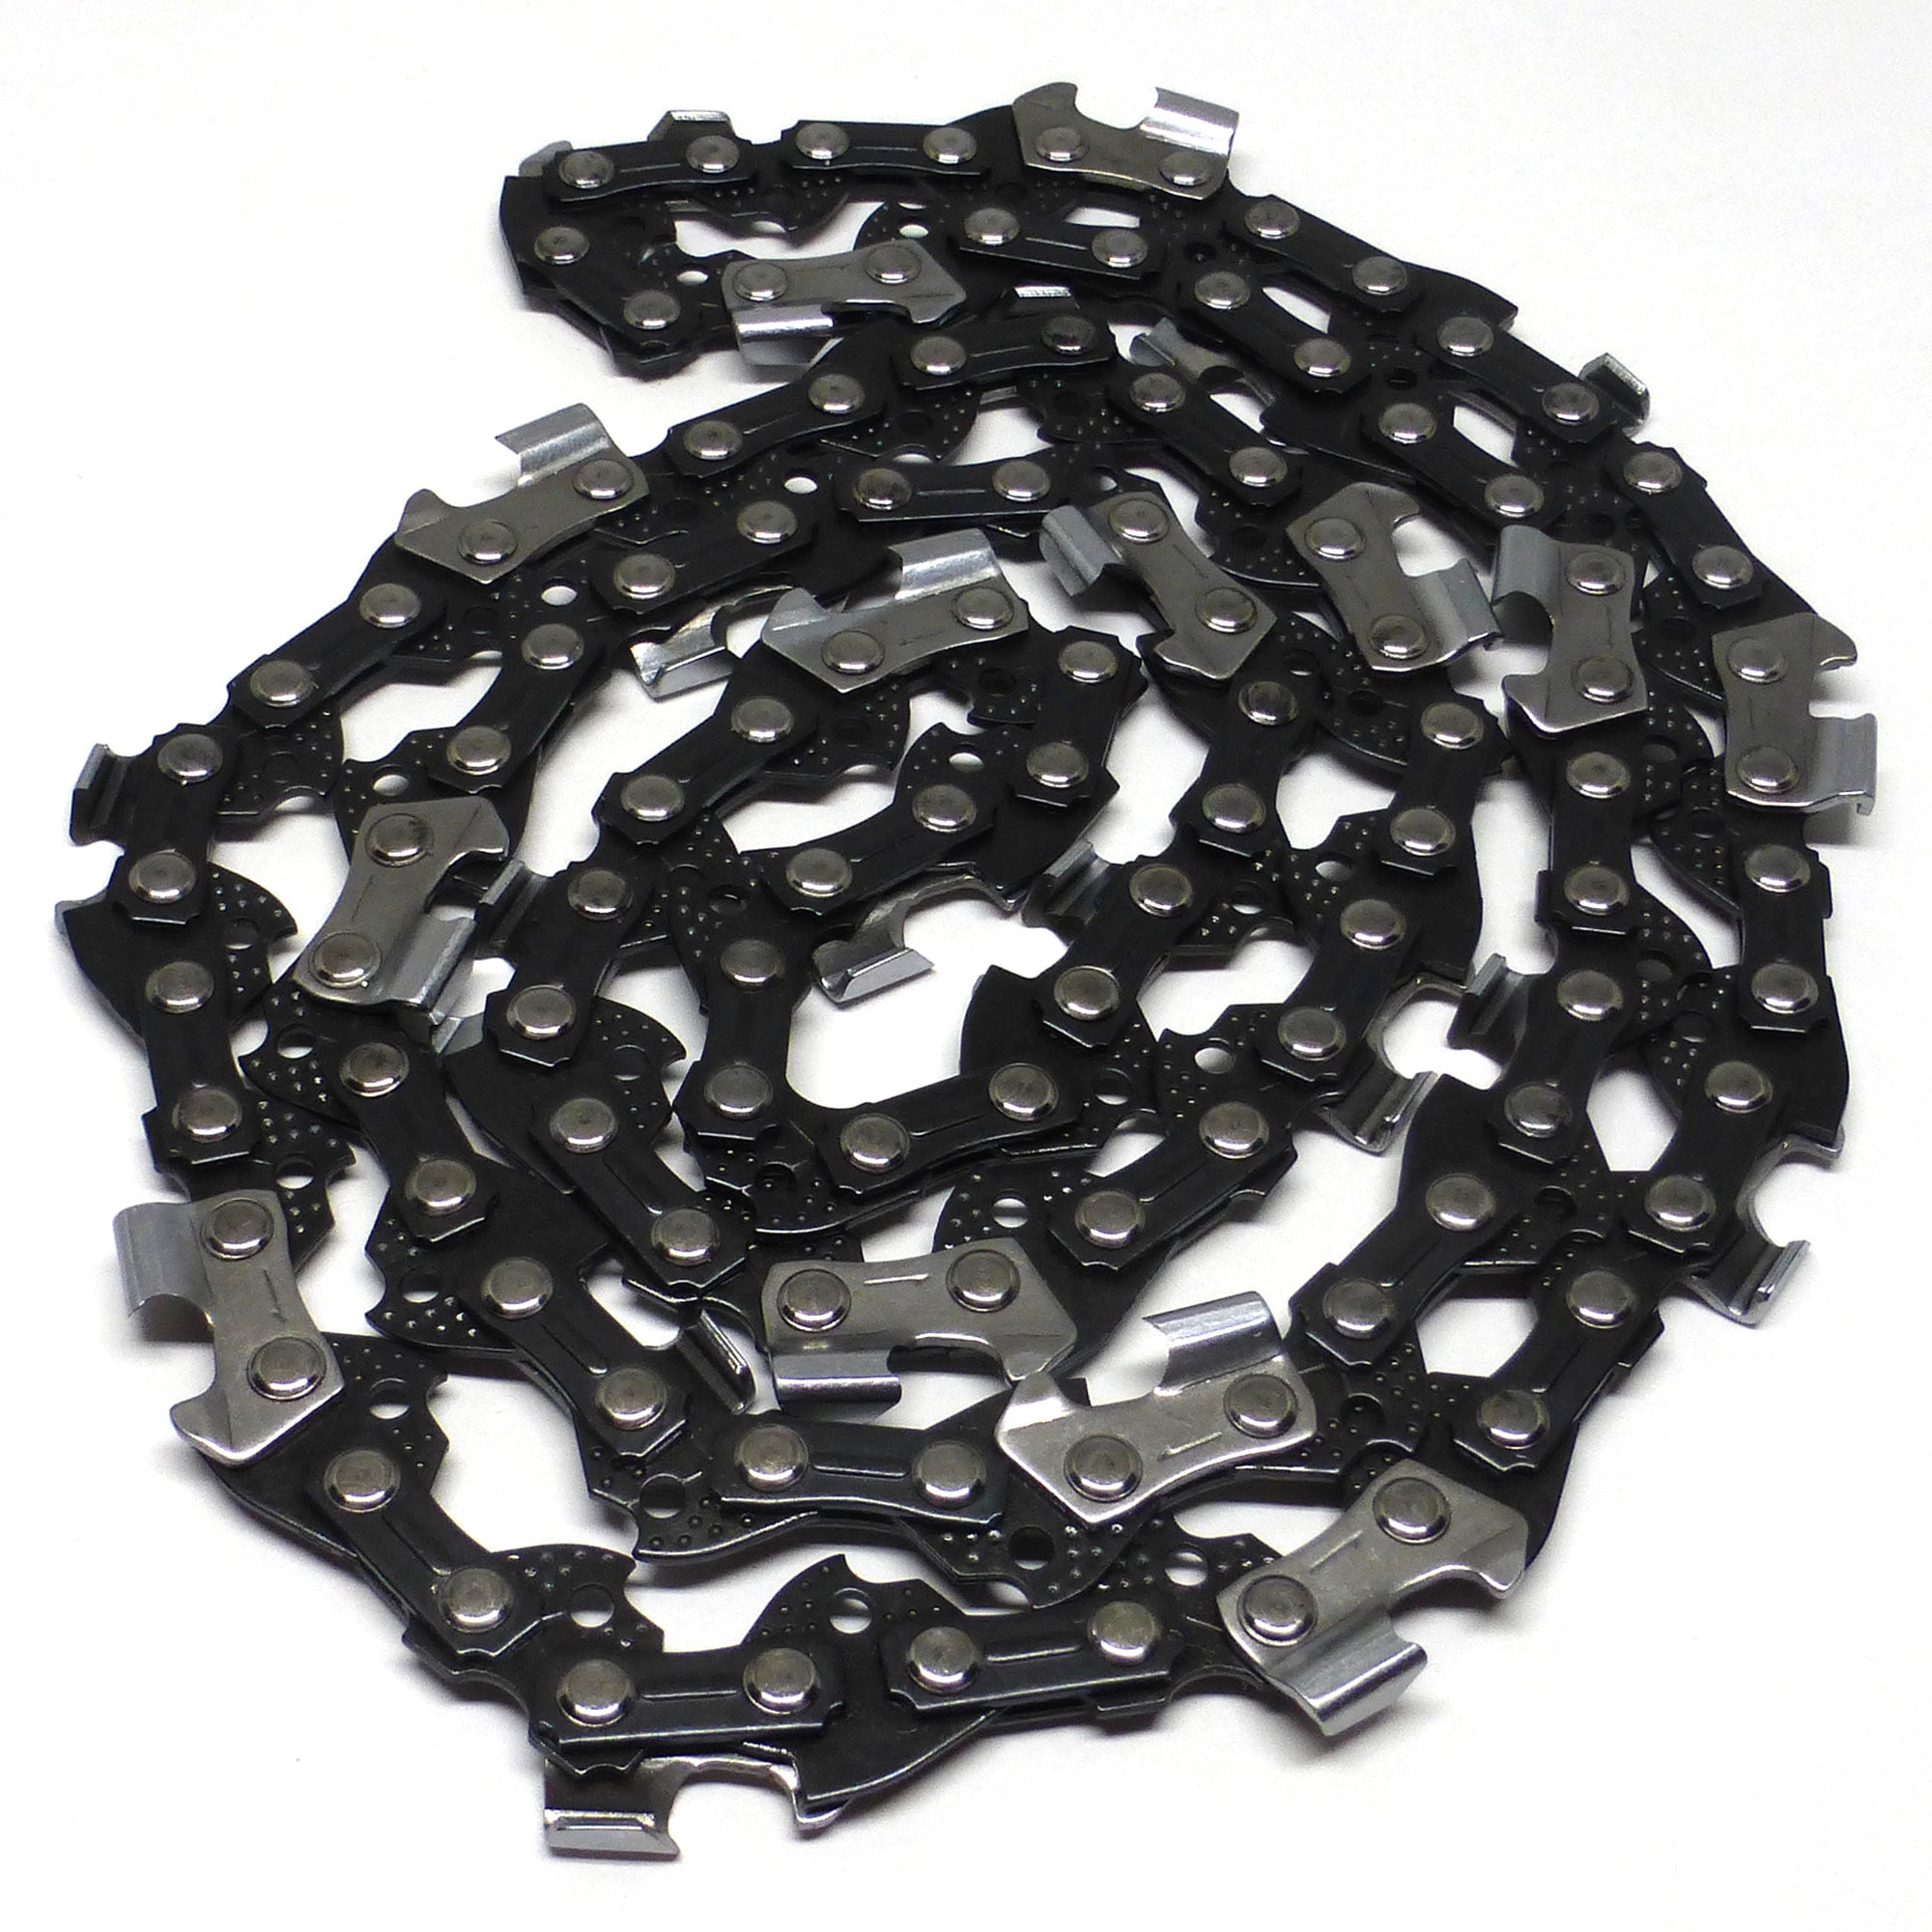 6x 16" Semi Chisel Chainsaw Chain for Stihl MS250 MS 211-3/8" 0.050" 55 DL 